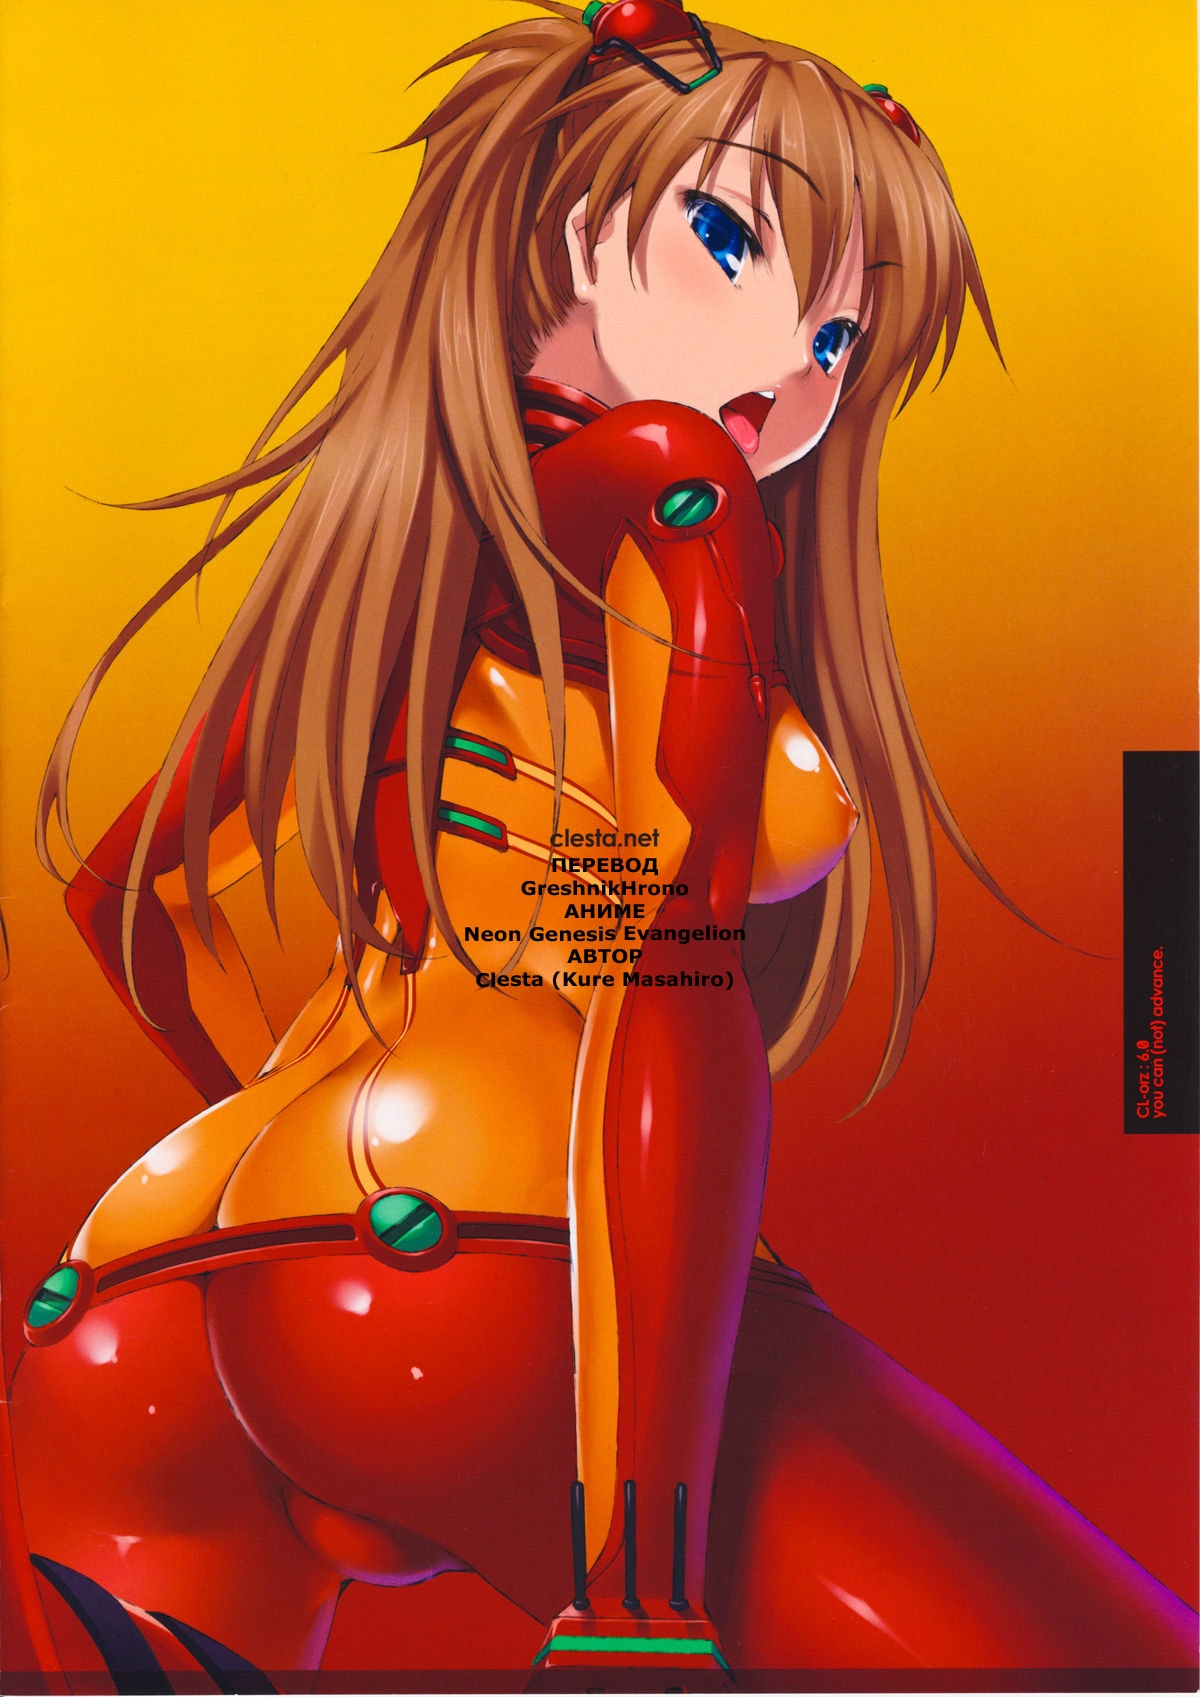 (C76) [Clesta (Cle Masahiro)] CL-orz 6.0 you can (not) advance. (Rebuild of Evangelion) [Russian] [Decensored] 6